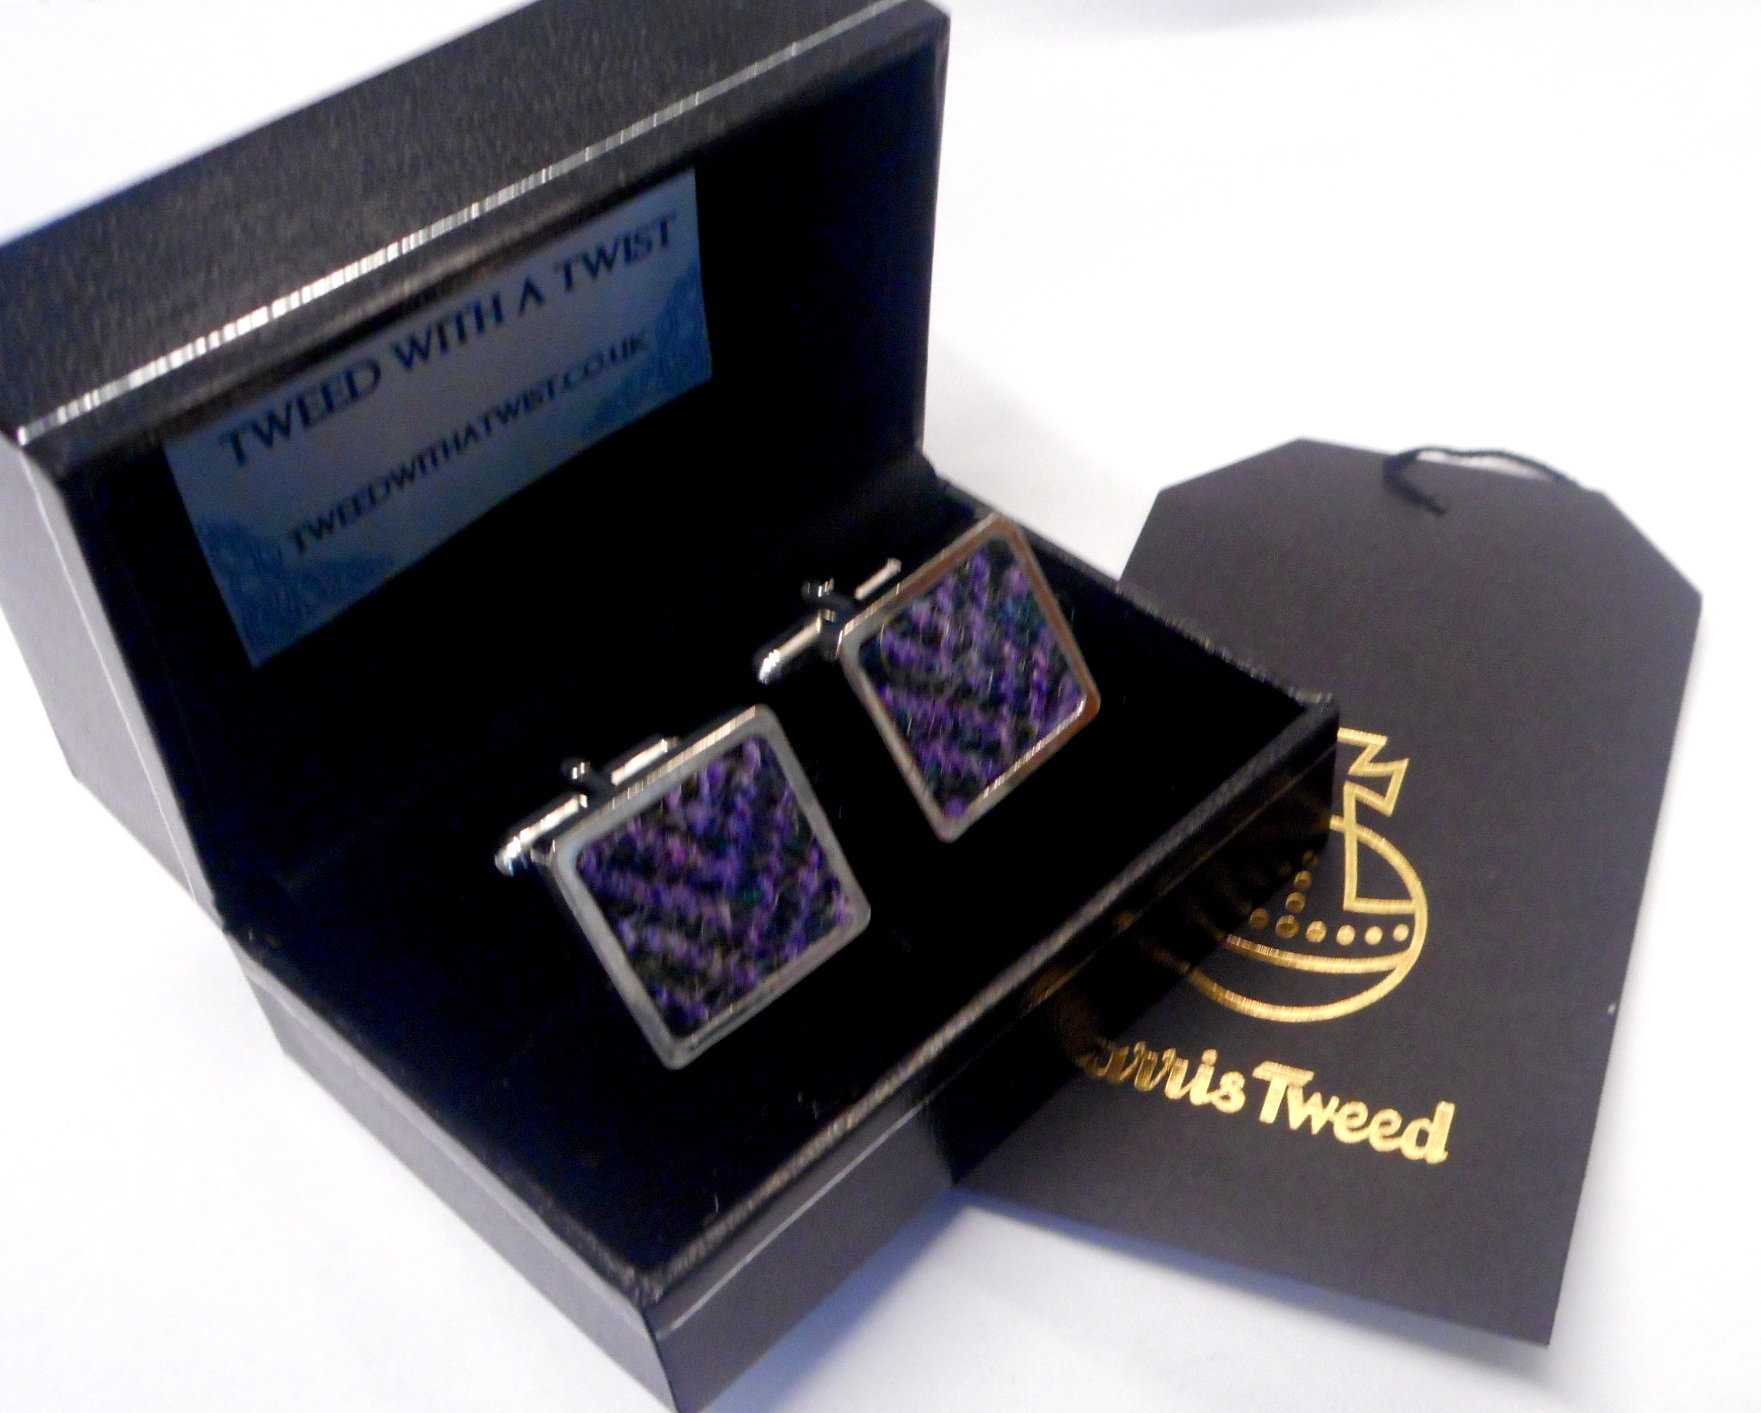 Cufflinks in Harris Tweed purple heather herringbone mens gift for him Scottish made in Scotland  square cuff links for fathers day, Christmas gift